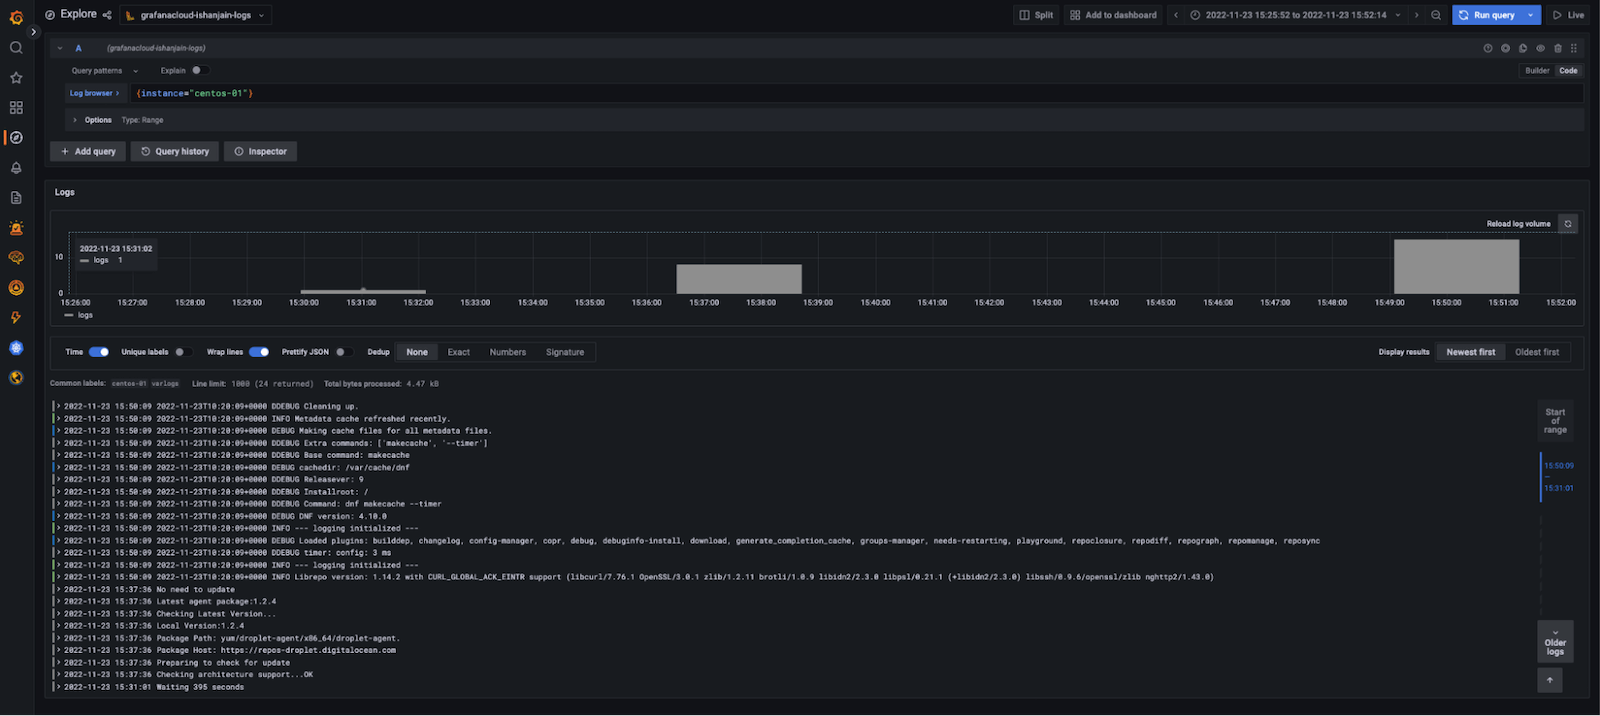 A Grafana dashboard showing ingested Logs from a Linux host